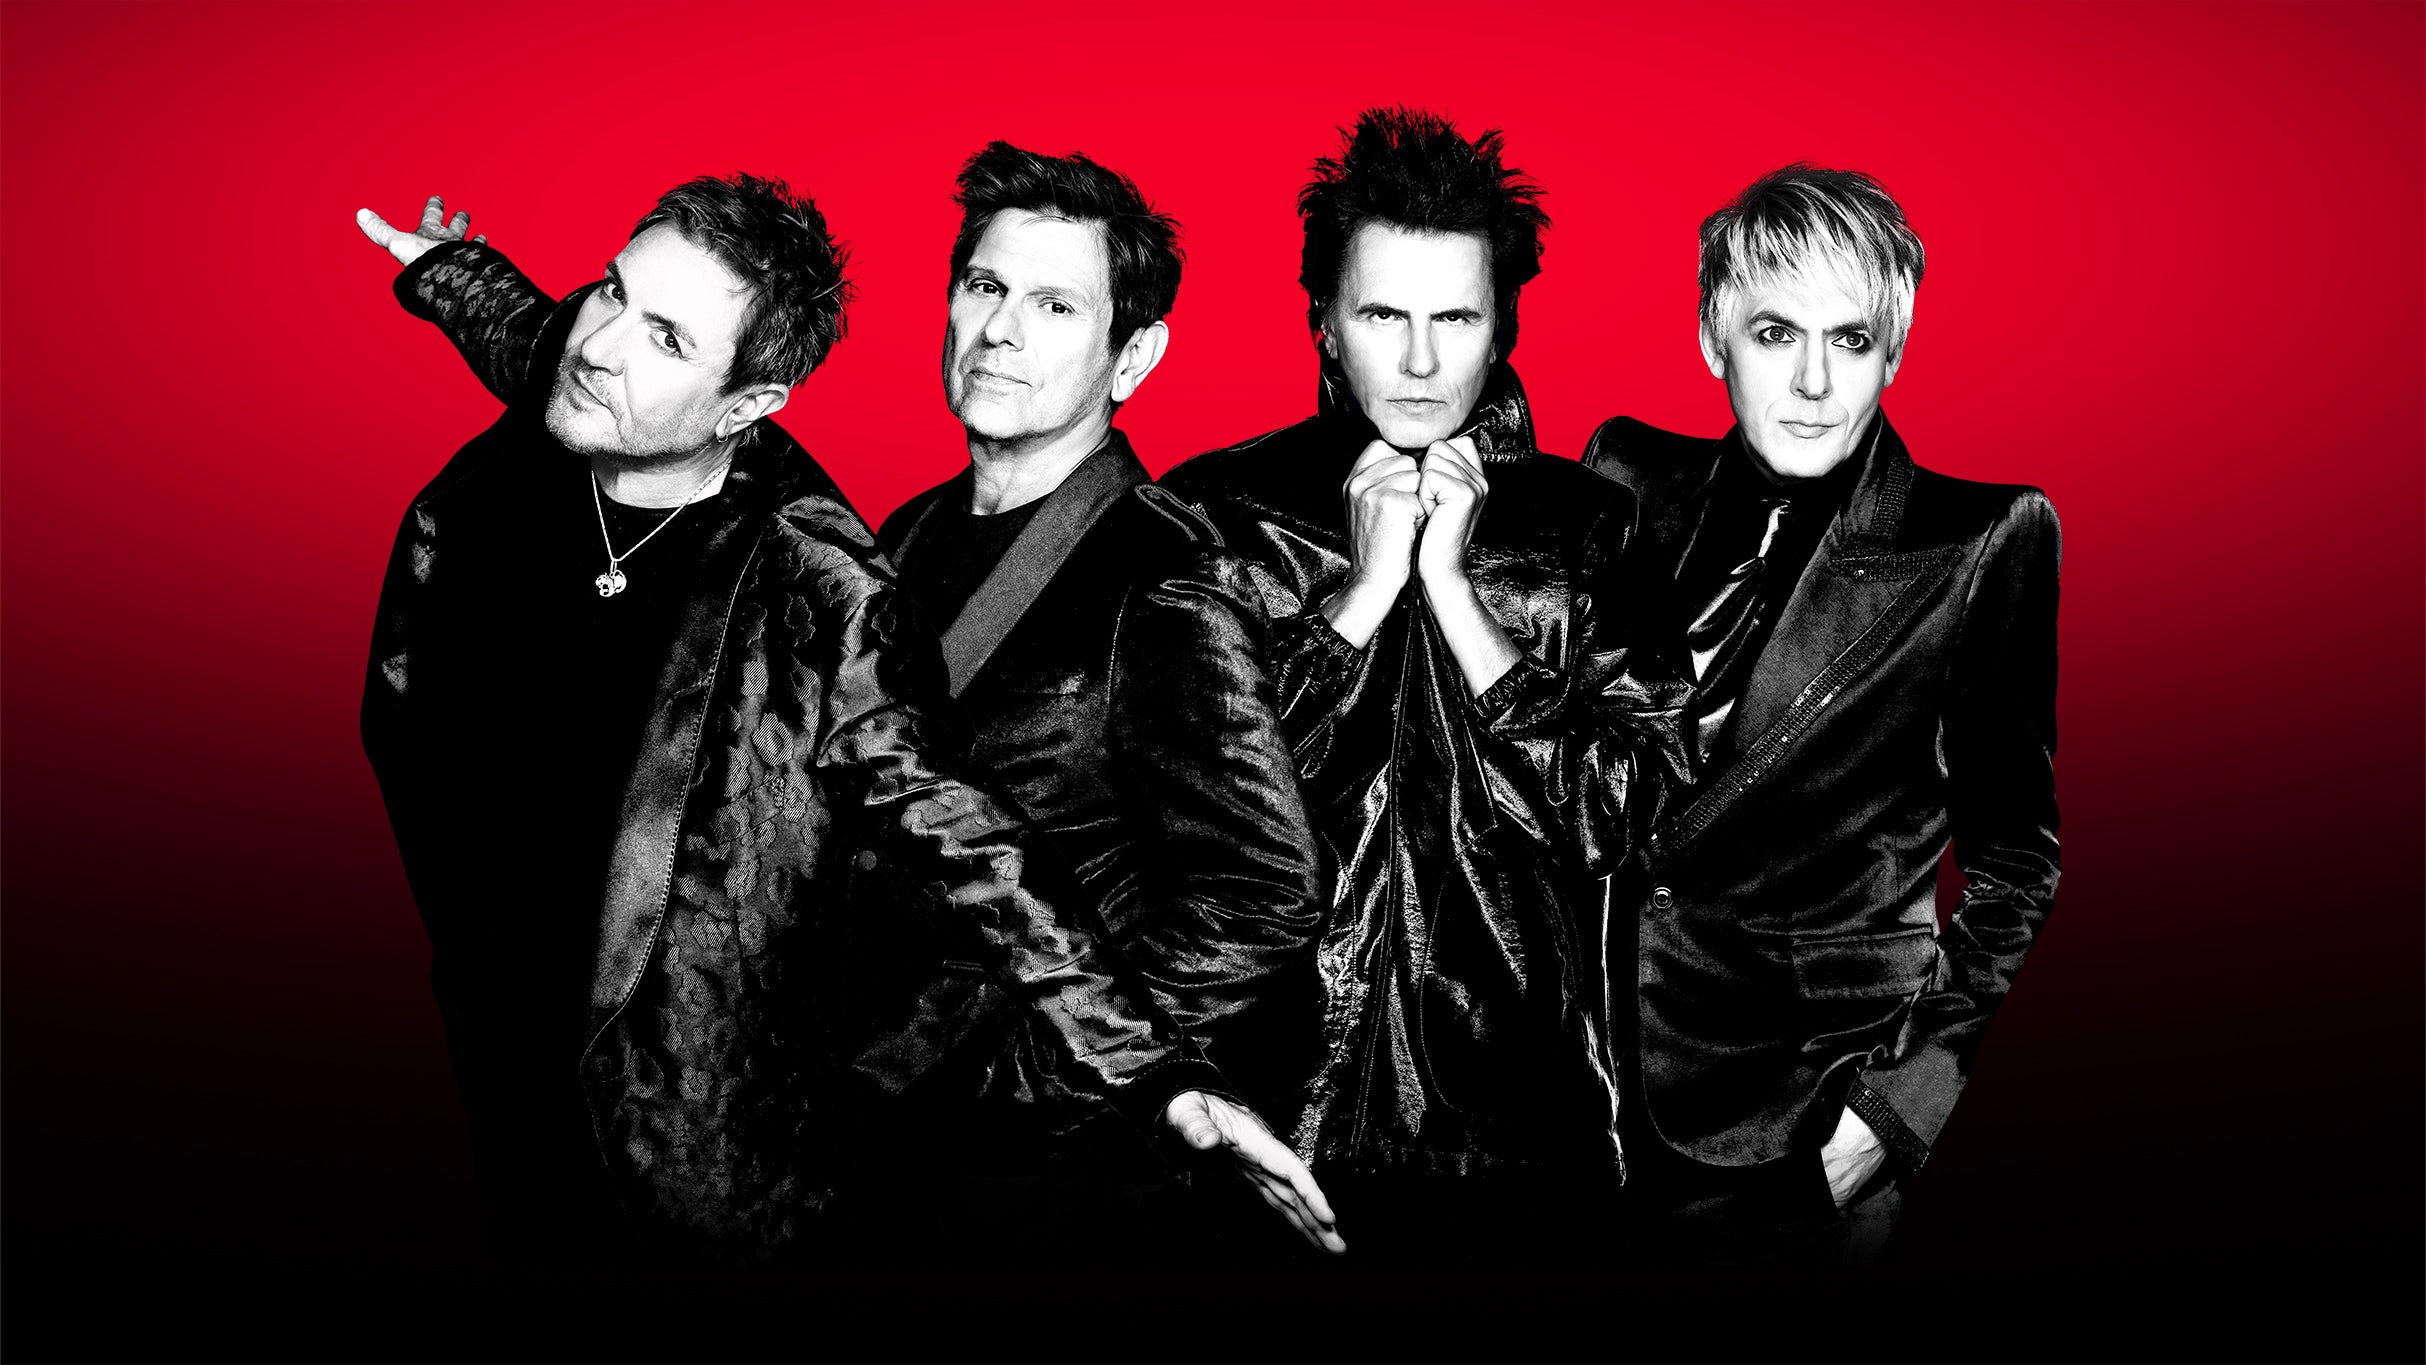 DURAN DURAN: FUTURE PAST pre-sale password for early tickets in Cuyahoga Falls